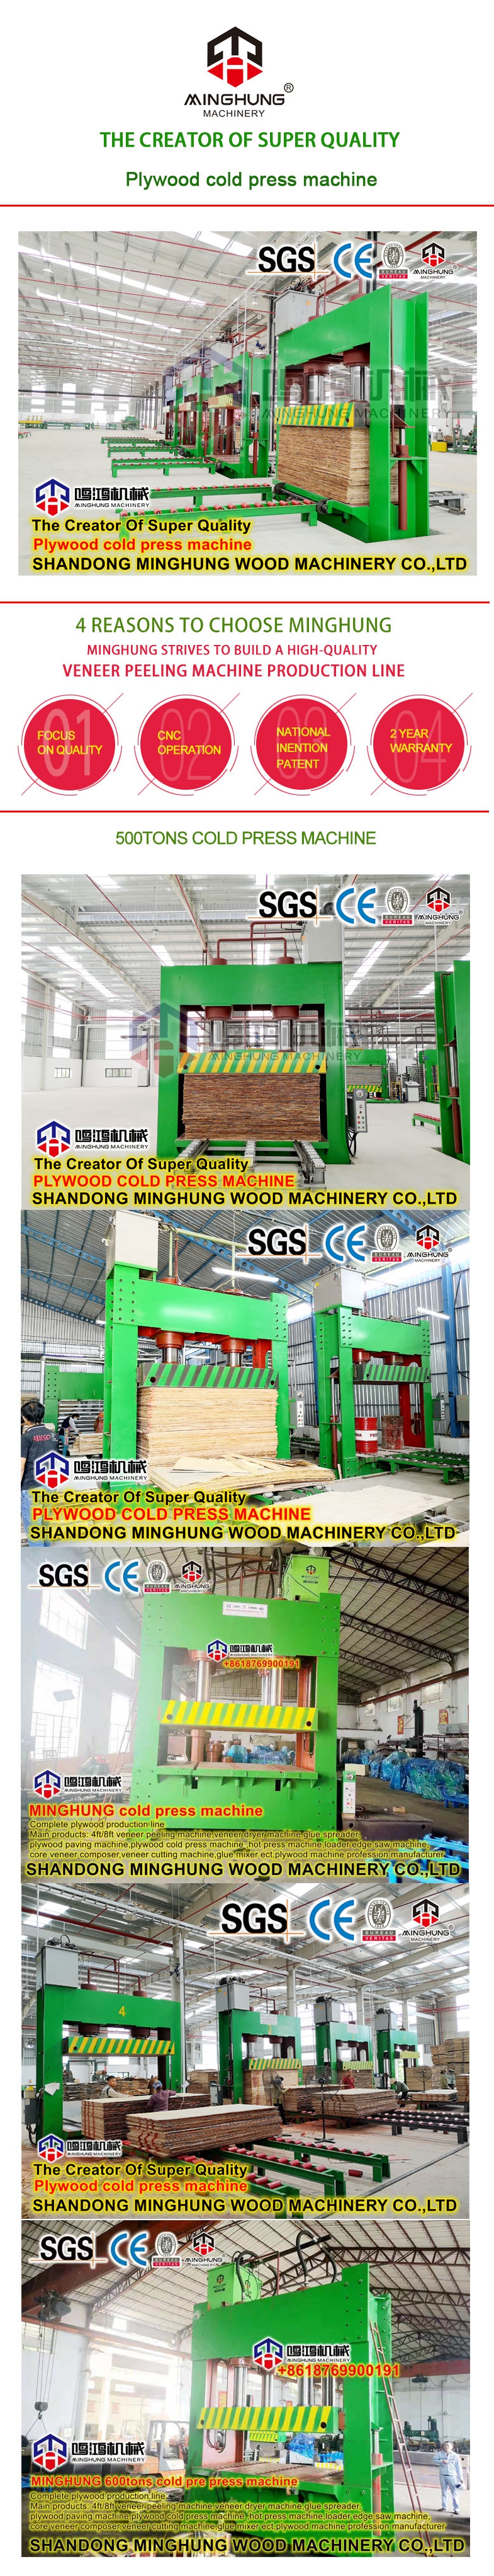 MINGHUNG plywood cold press machine